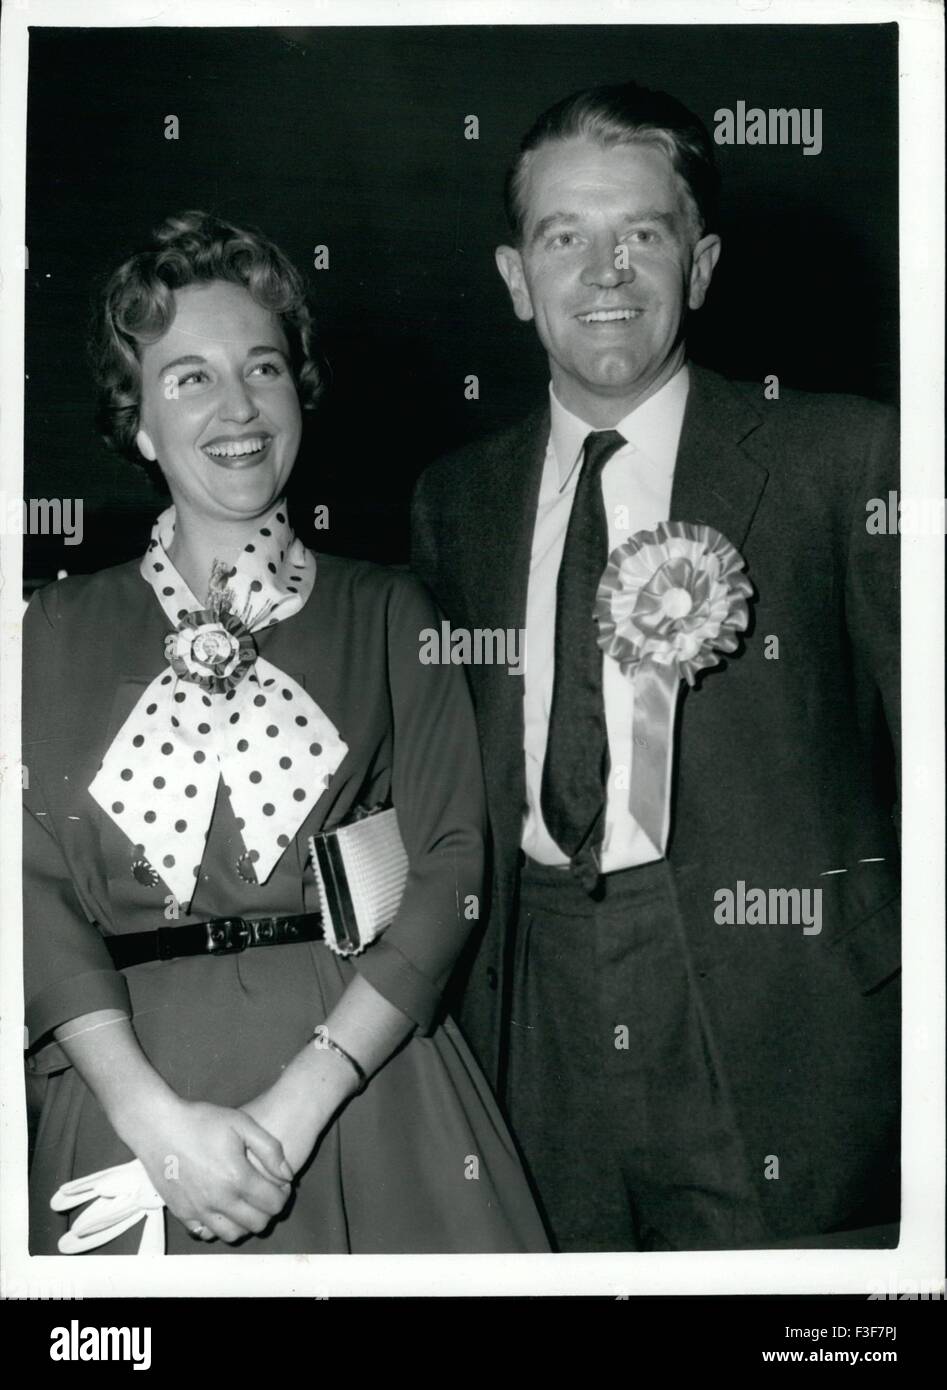 Conservatives win the General Elections. Chris Chataway becomes an M.P. 24th Feb, 1959. Chris Chataway, the man who pioneered the four minute-mile, also pioneered a Conservative victory in Lewisham North early today. Photo Shows: Chris Chataway, pictured with his wife after he became Tory candidate for Lewisham North with a majority of 4,613 votes over his Labour opponent, Mr. MacDermot. © Keystone Pictures USA/ZUMAPRESS.com/Alamy Live News Stock Photo